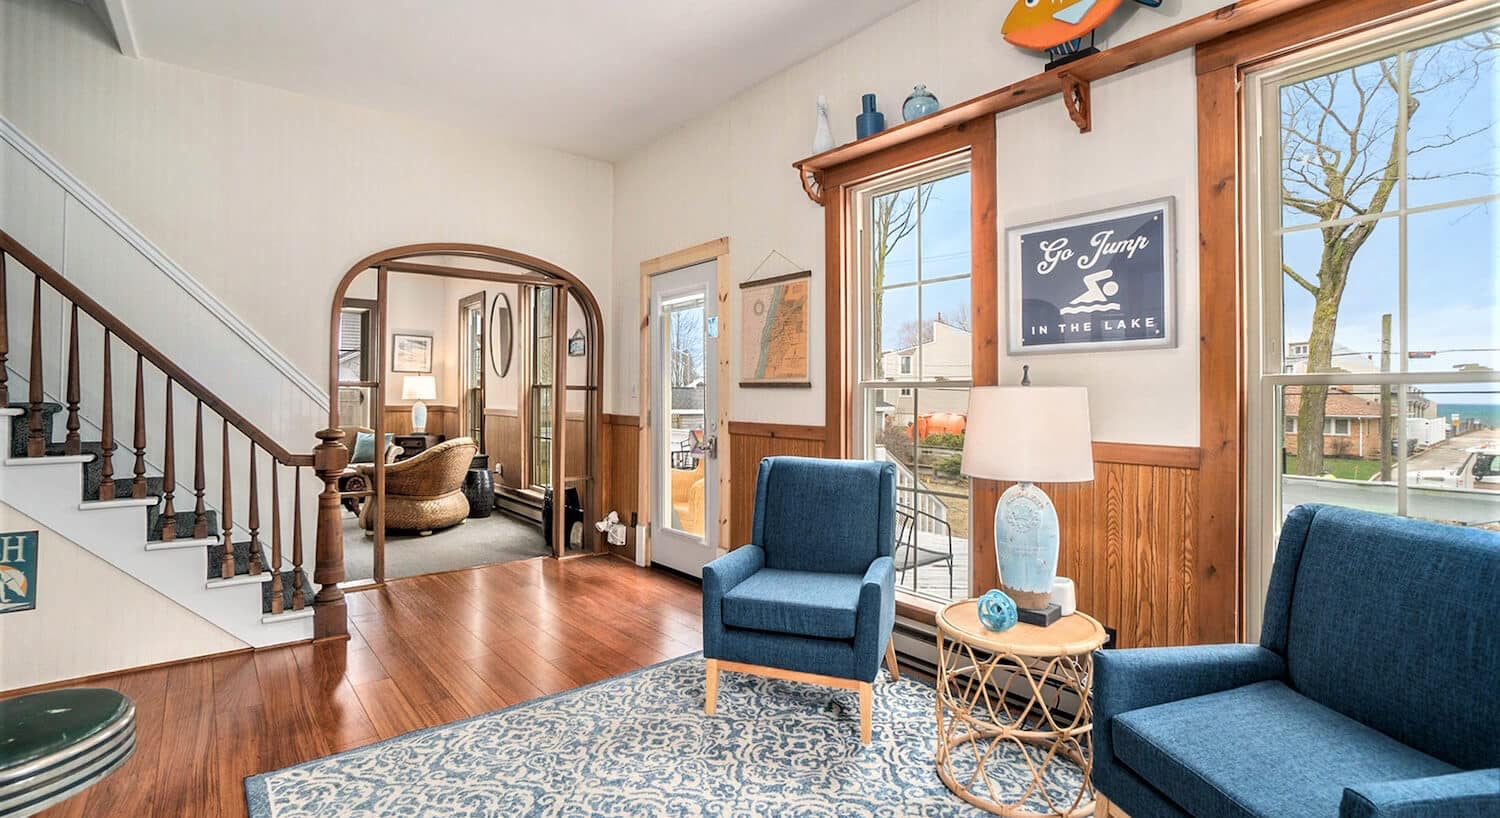 A parlor with wood floors, a blue and white tapestry area rug, blue wingback chairs, a wicker table with a lamp in between them, an archway leading to another sitting room, and stairs leading to a second floor.